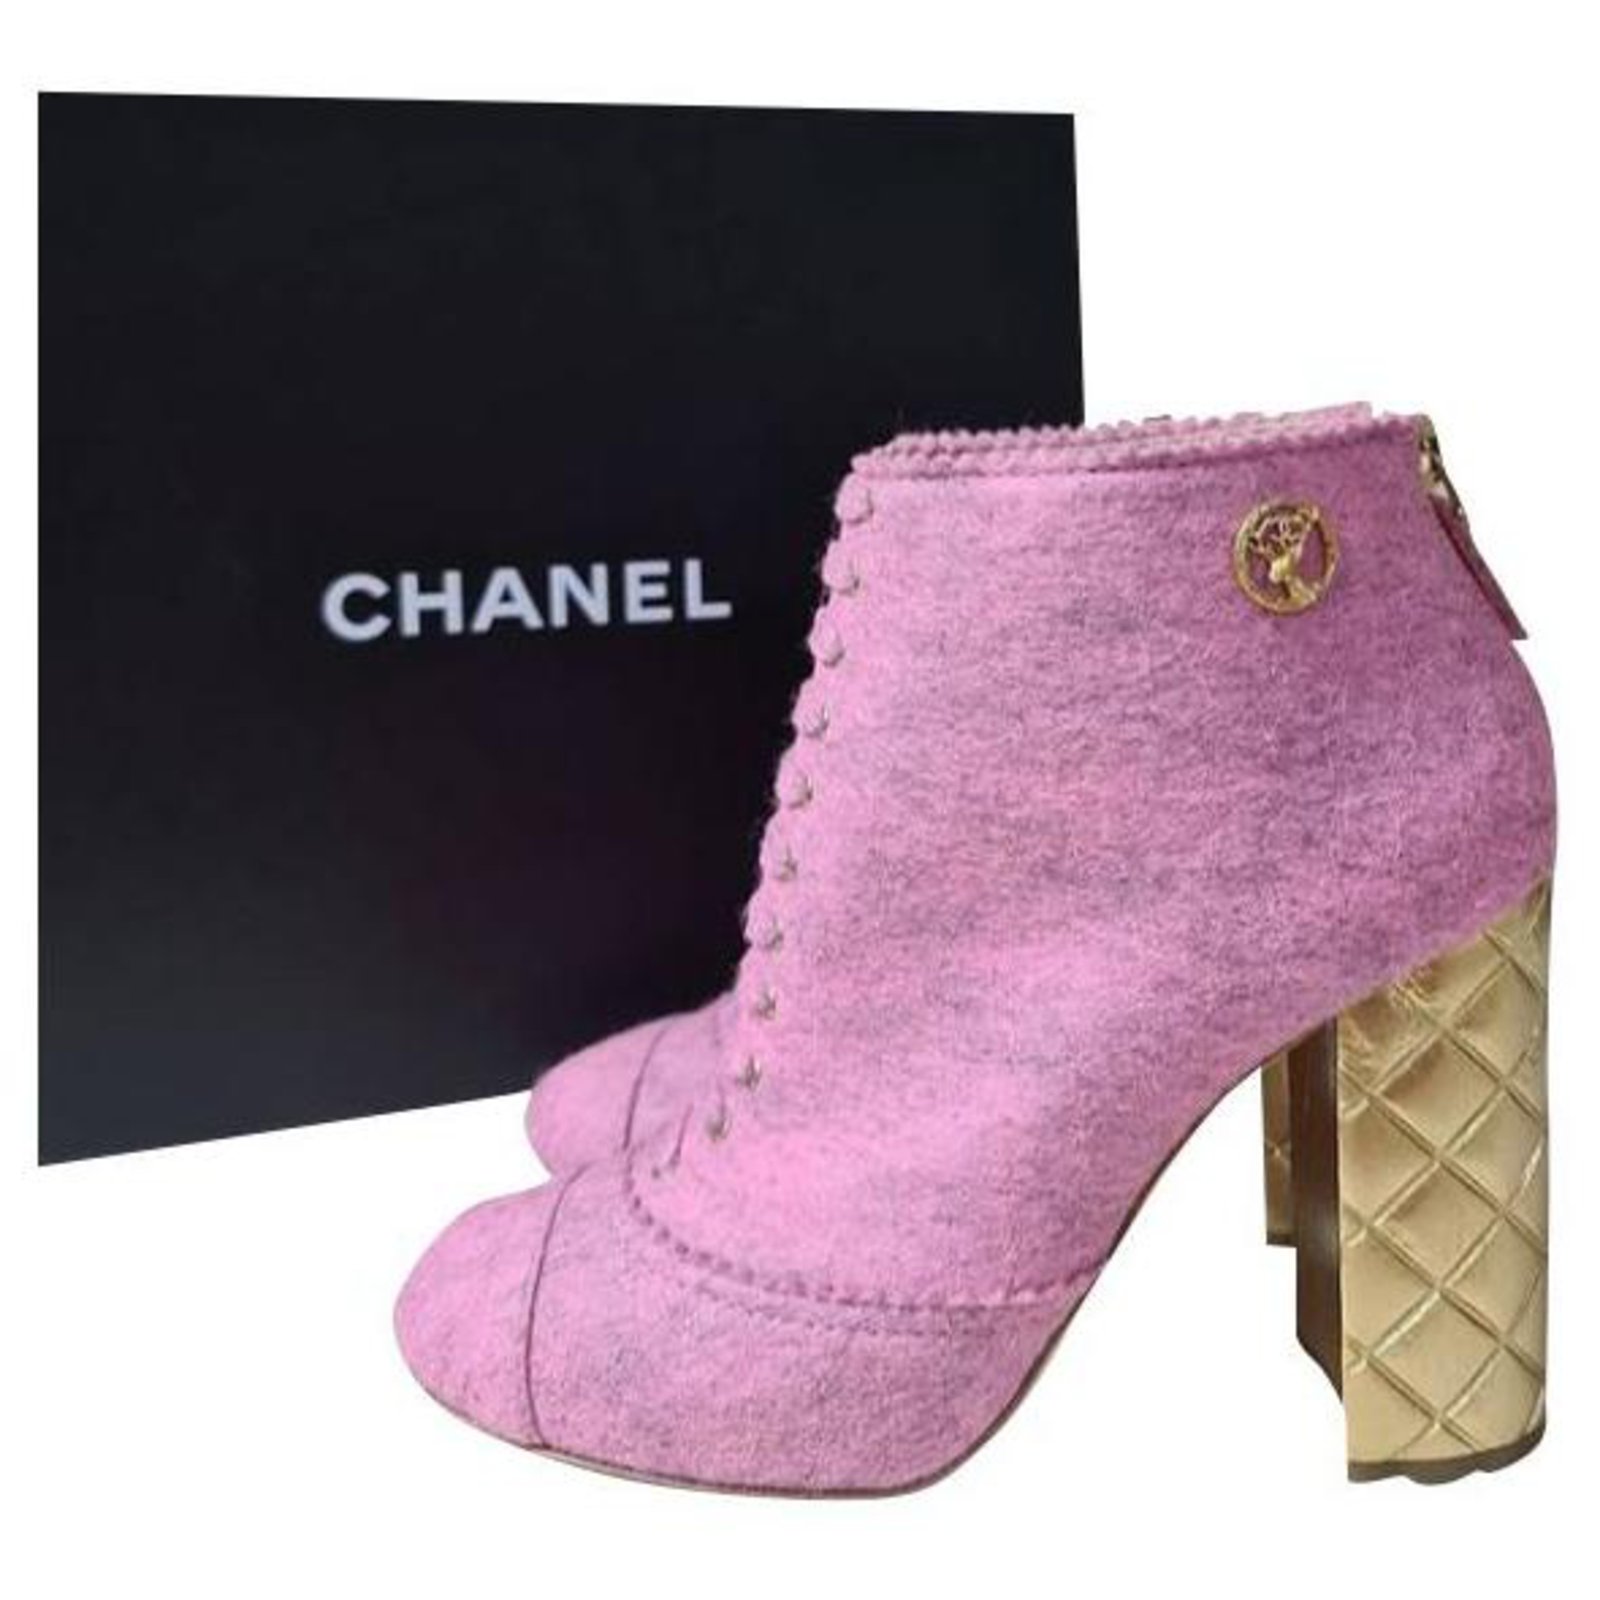 Chanel Pink and Black Sparkle Ankle Boots - Ann's Fabulous Closeouts